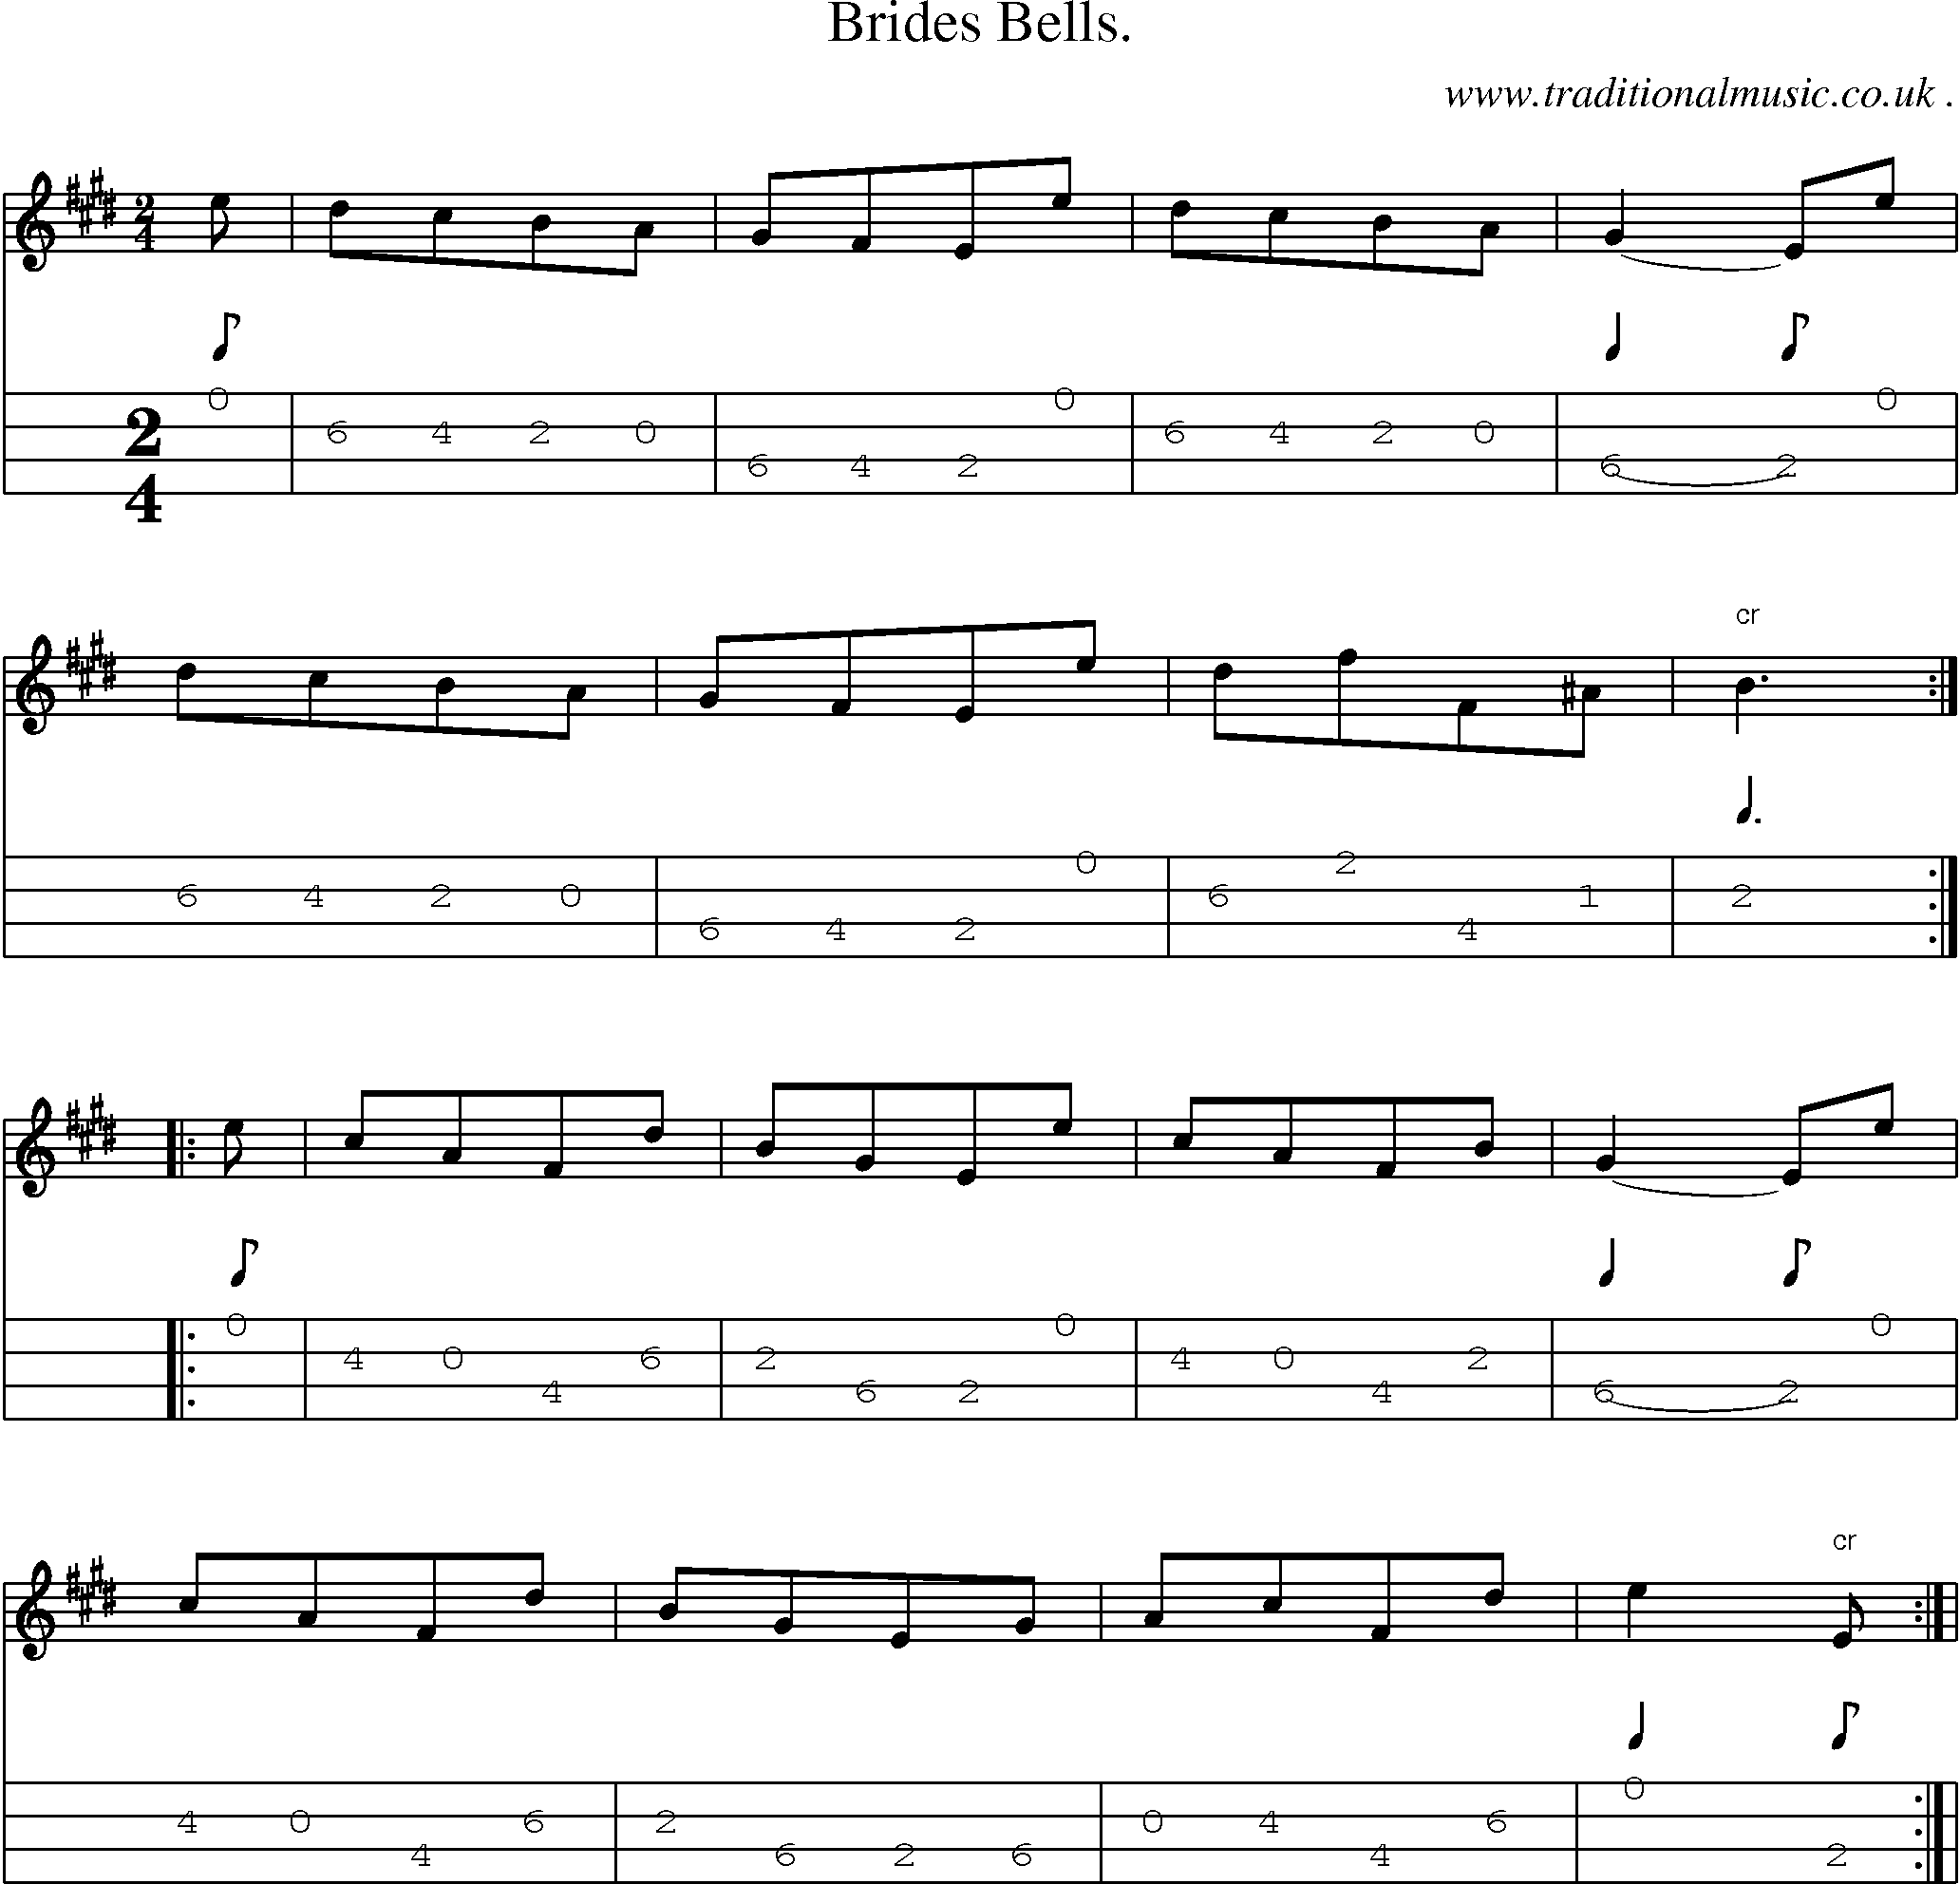 Sheet-Music and Mandolin Tabs for Brides Bells